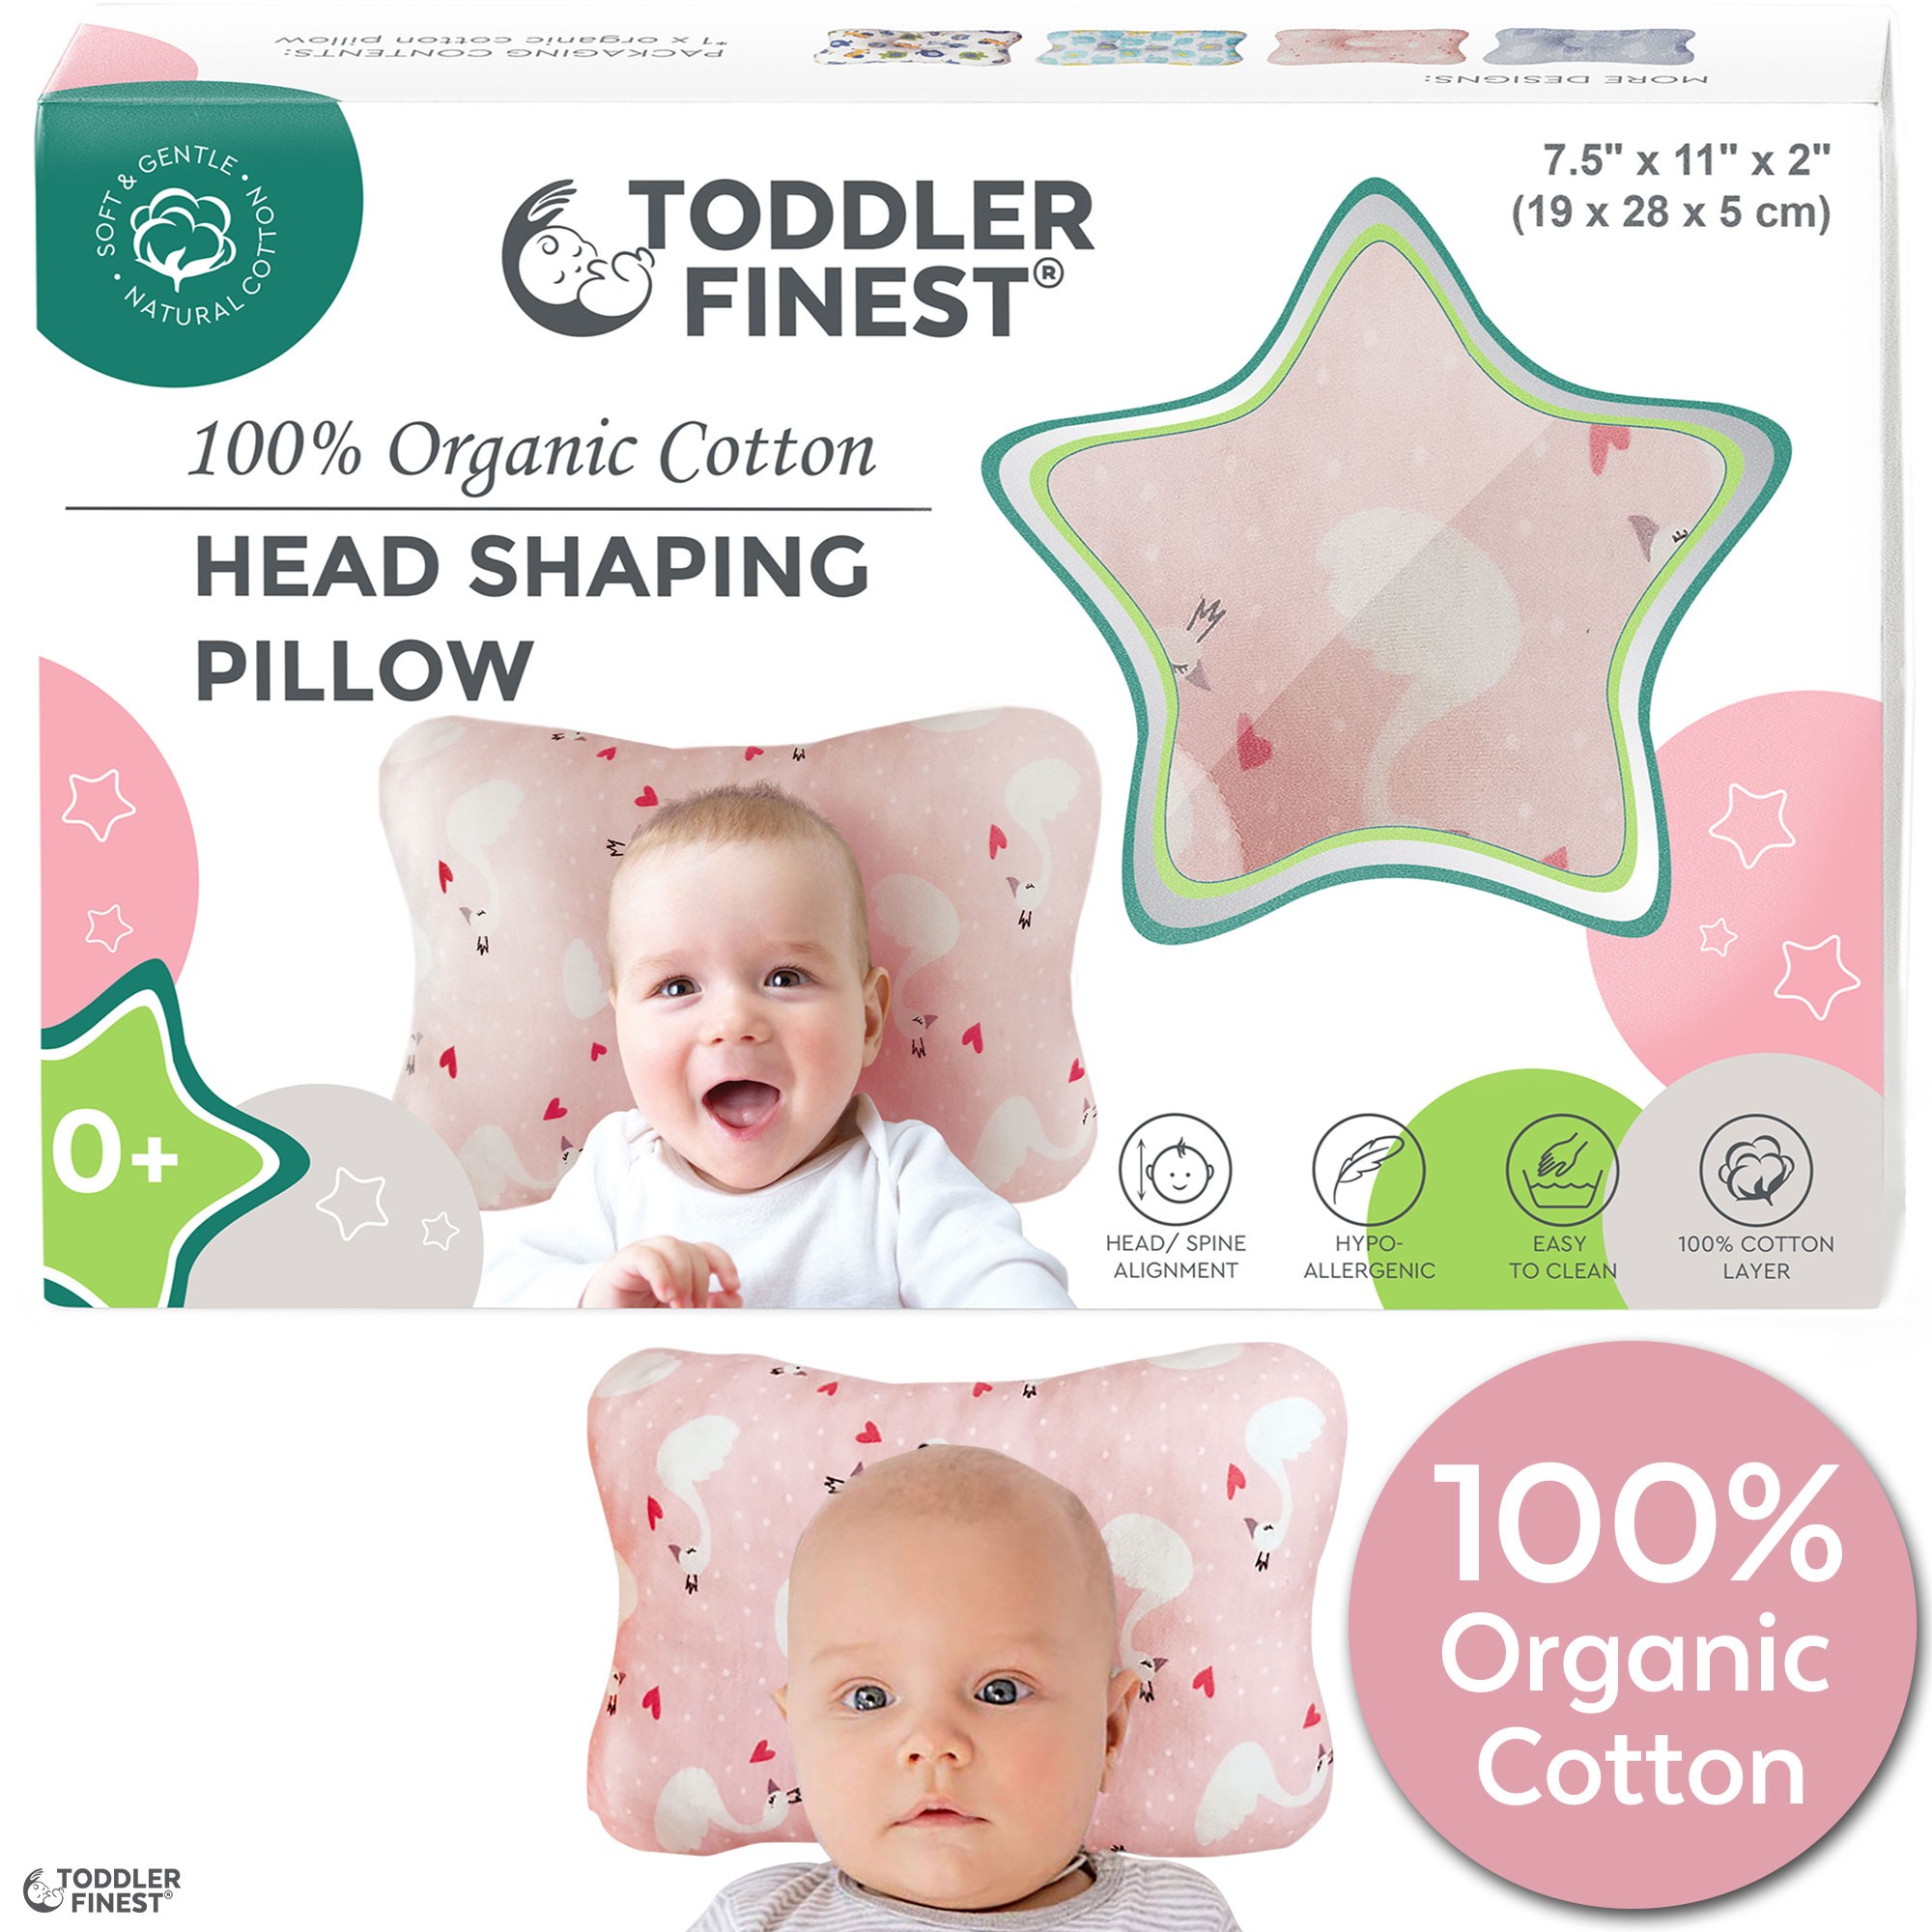 Baby Head Shaping Pillow/Baby Sleep Positioner for Neck Premium Baby Anti Flat Head Pillows for Sleeping Support Organic Baby Pillow with Infant Pillow Cover and Security Blanket for Newborn 